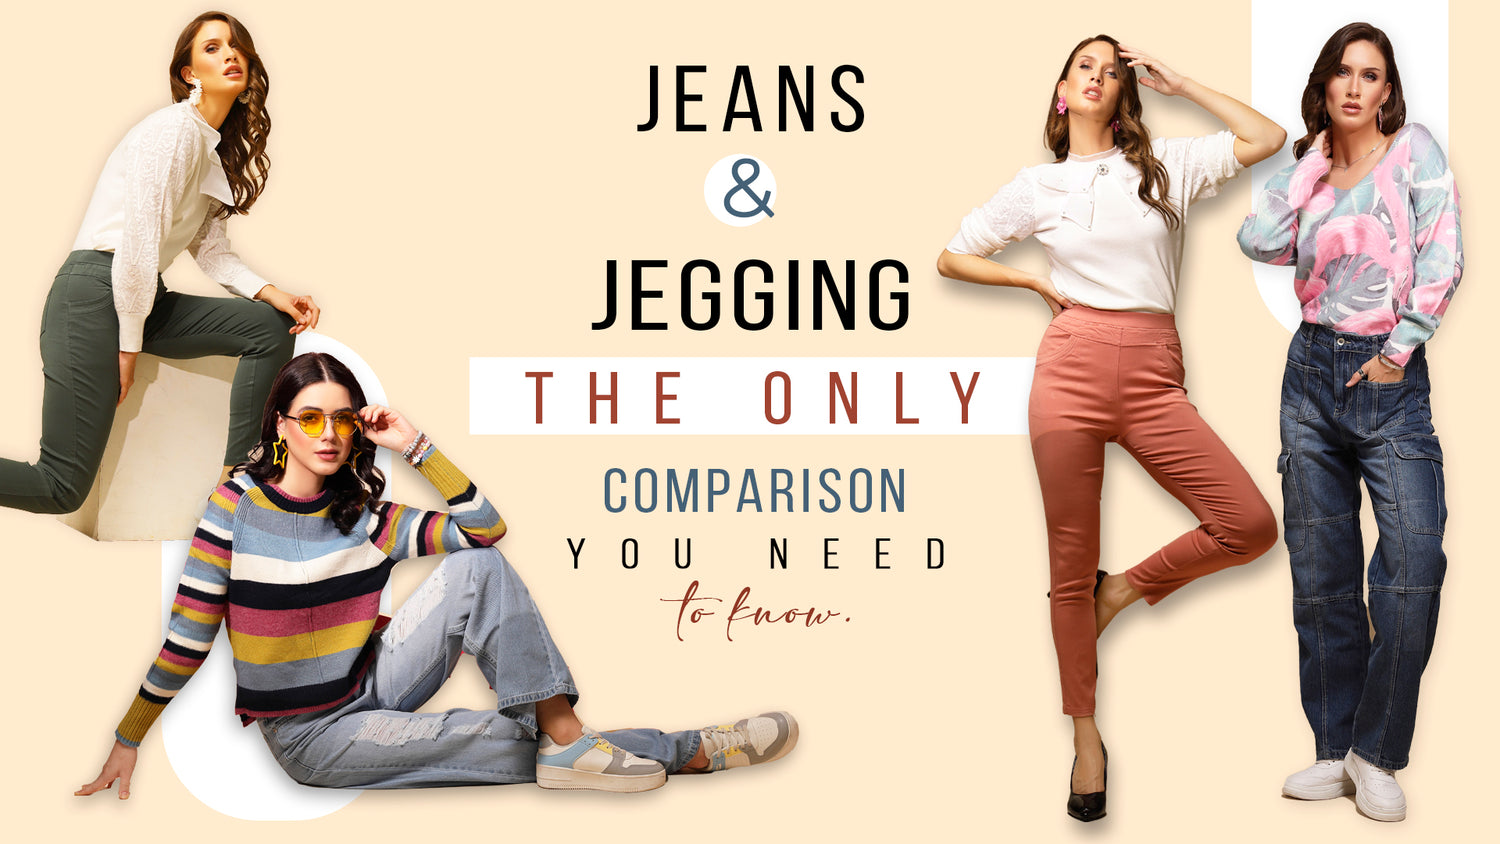 Skinny Jeans And Jeggings. The Only Comparison You Need To Know